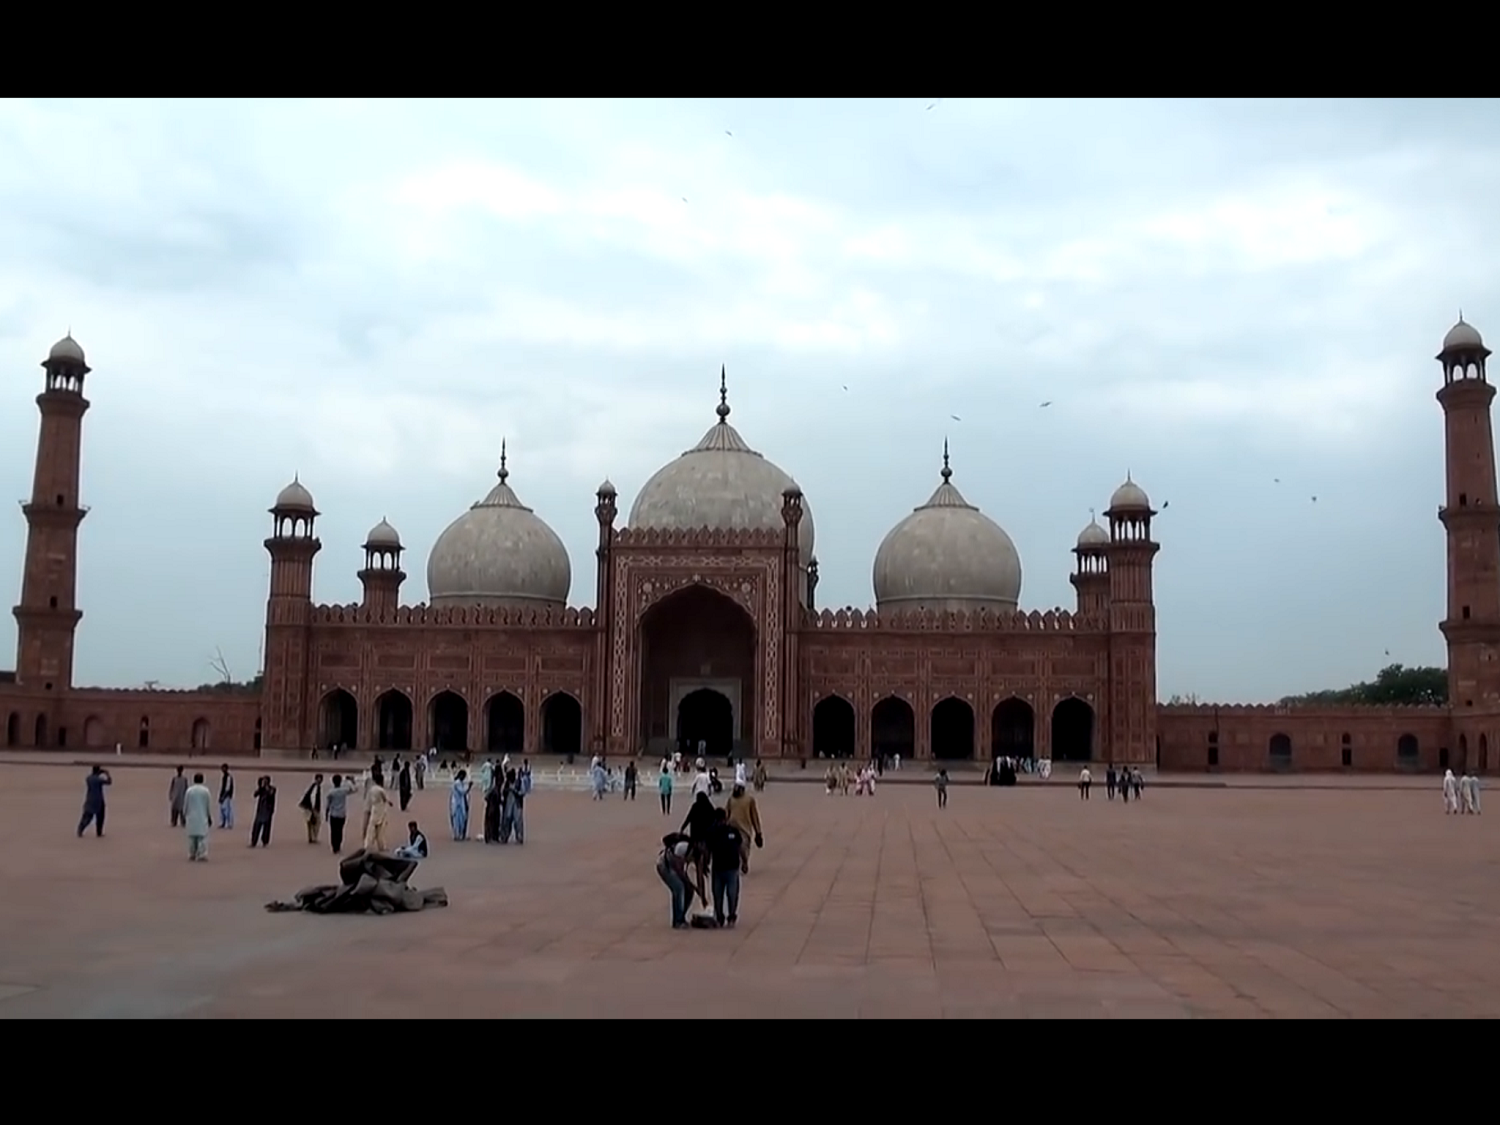 Apparently, thieves picked up the sacred relic from a glass case inside the Pakistan’s Badshahi Mosque, which was built in 1673 during the Moghul period. (Supplied)